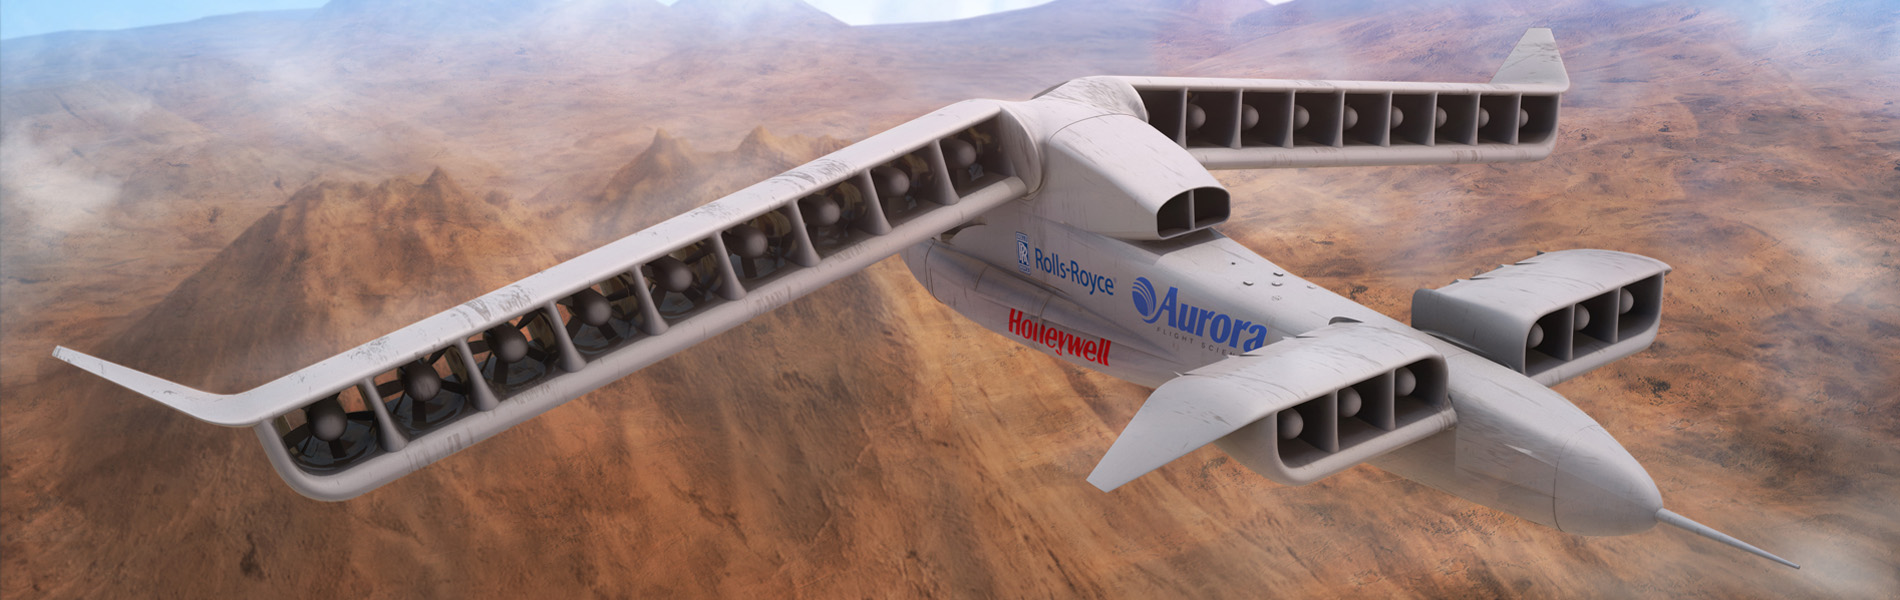 You-Ain’t-Gonna-Believe-This Design Wins DARPA X-Plane Deal